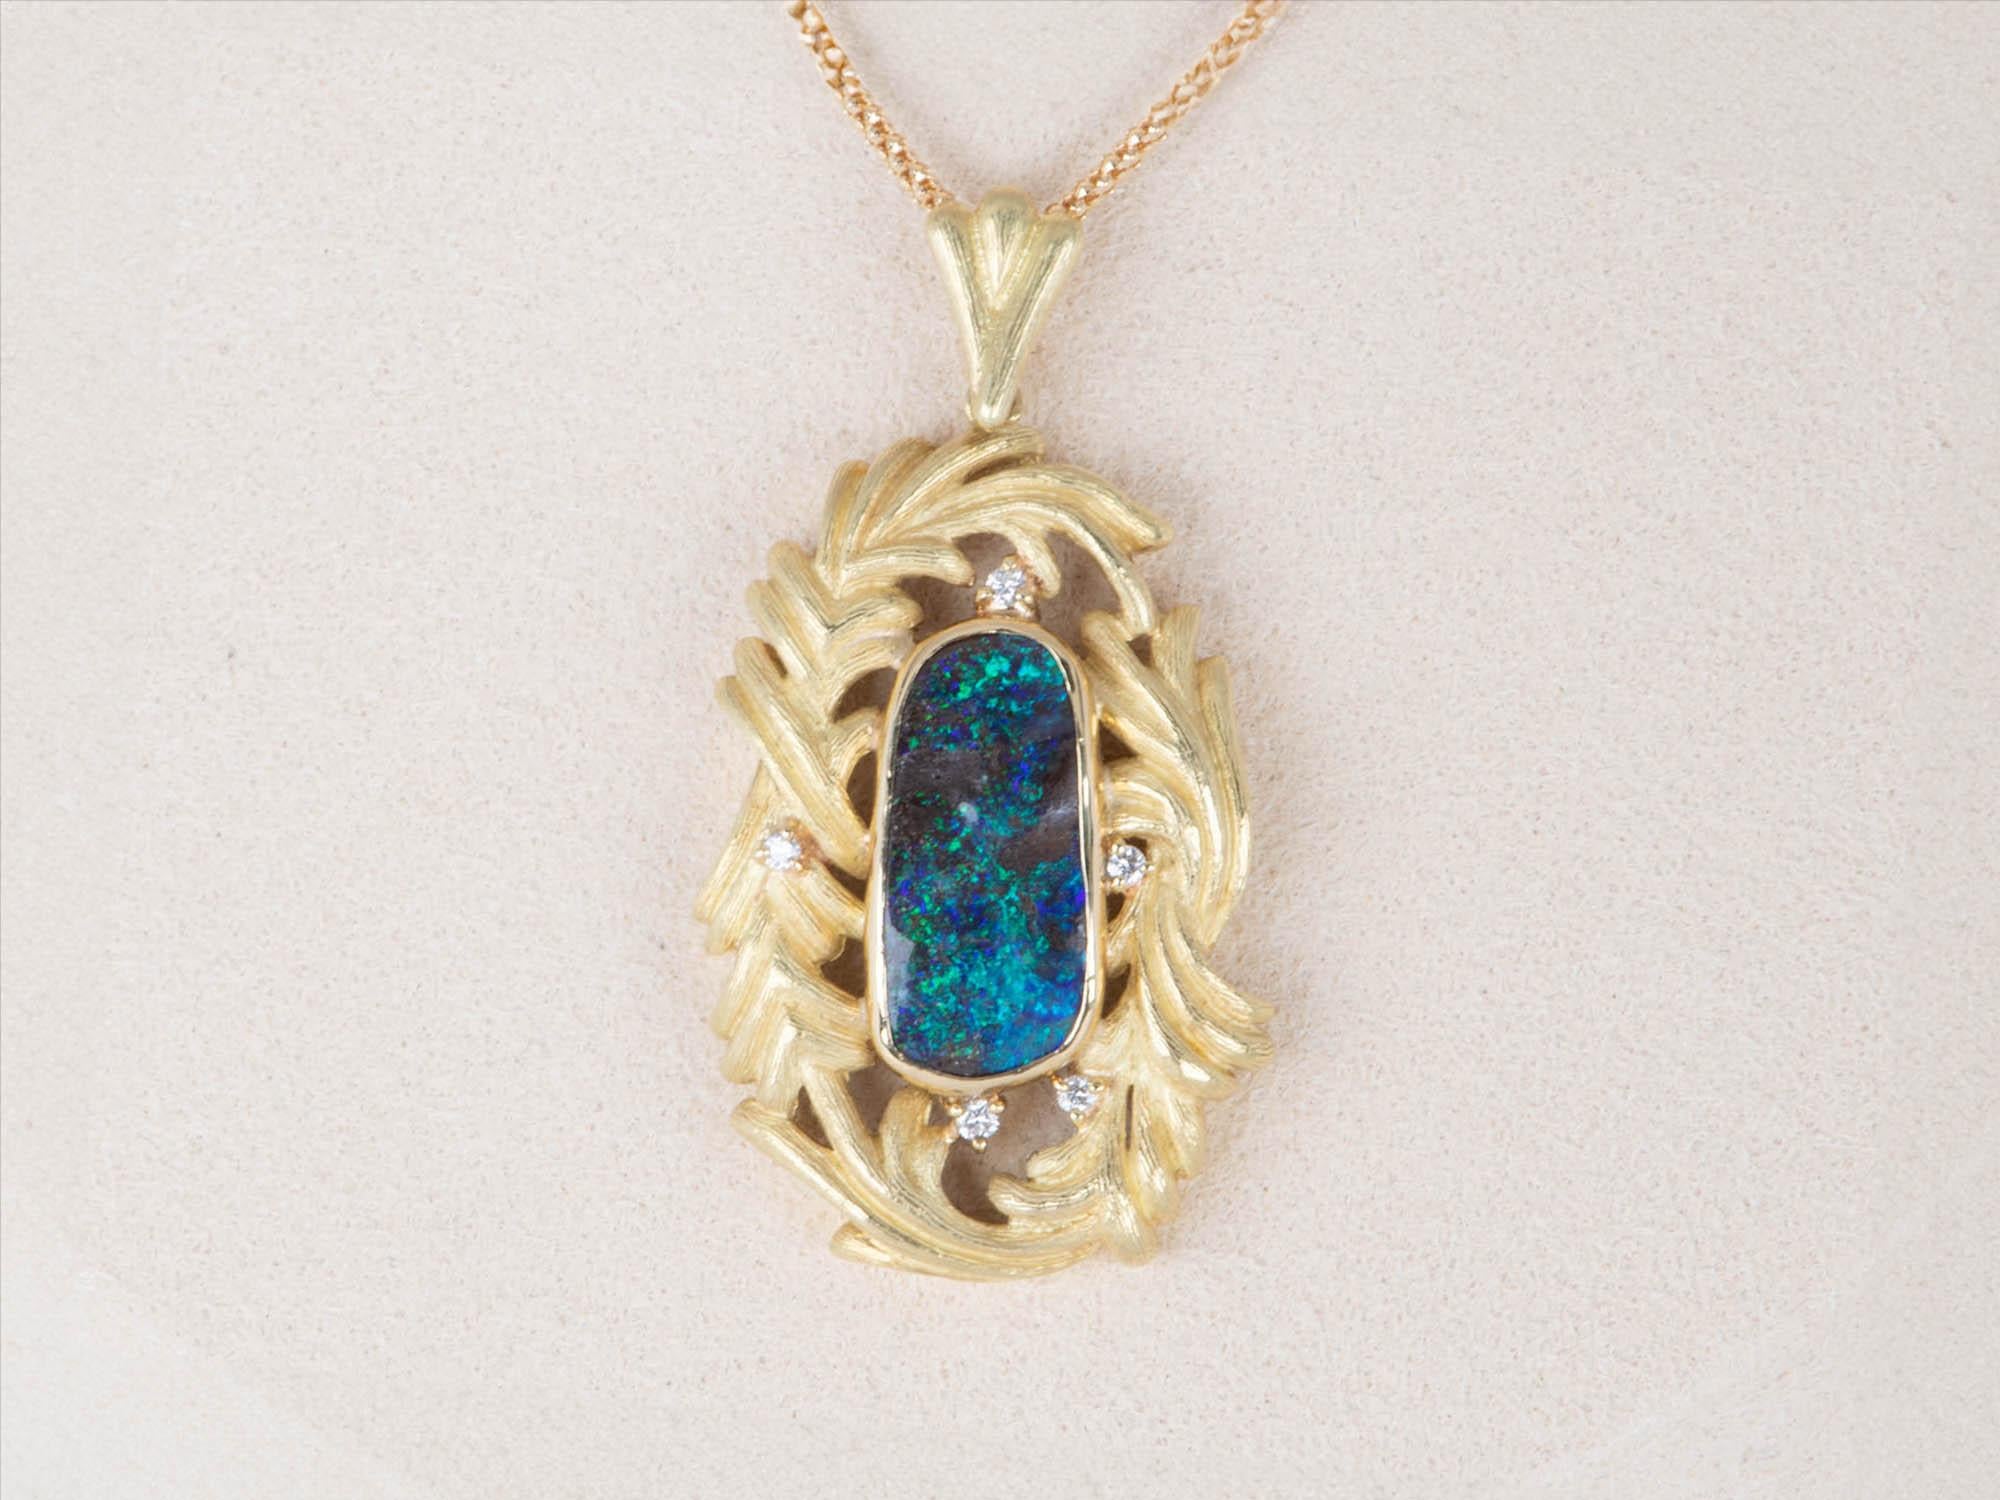 This exquisite Australian Boulder Opal pendant features a stunning feather-like design in a matte texture, crafted in beautiful solid 18K gold. The gorgeous opal emits a mysterious dark blue green color of play, perfectly accentuated by the buttery